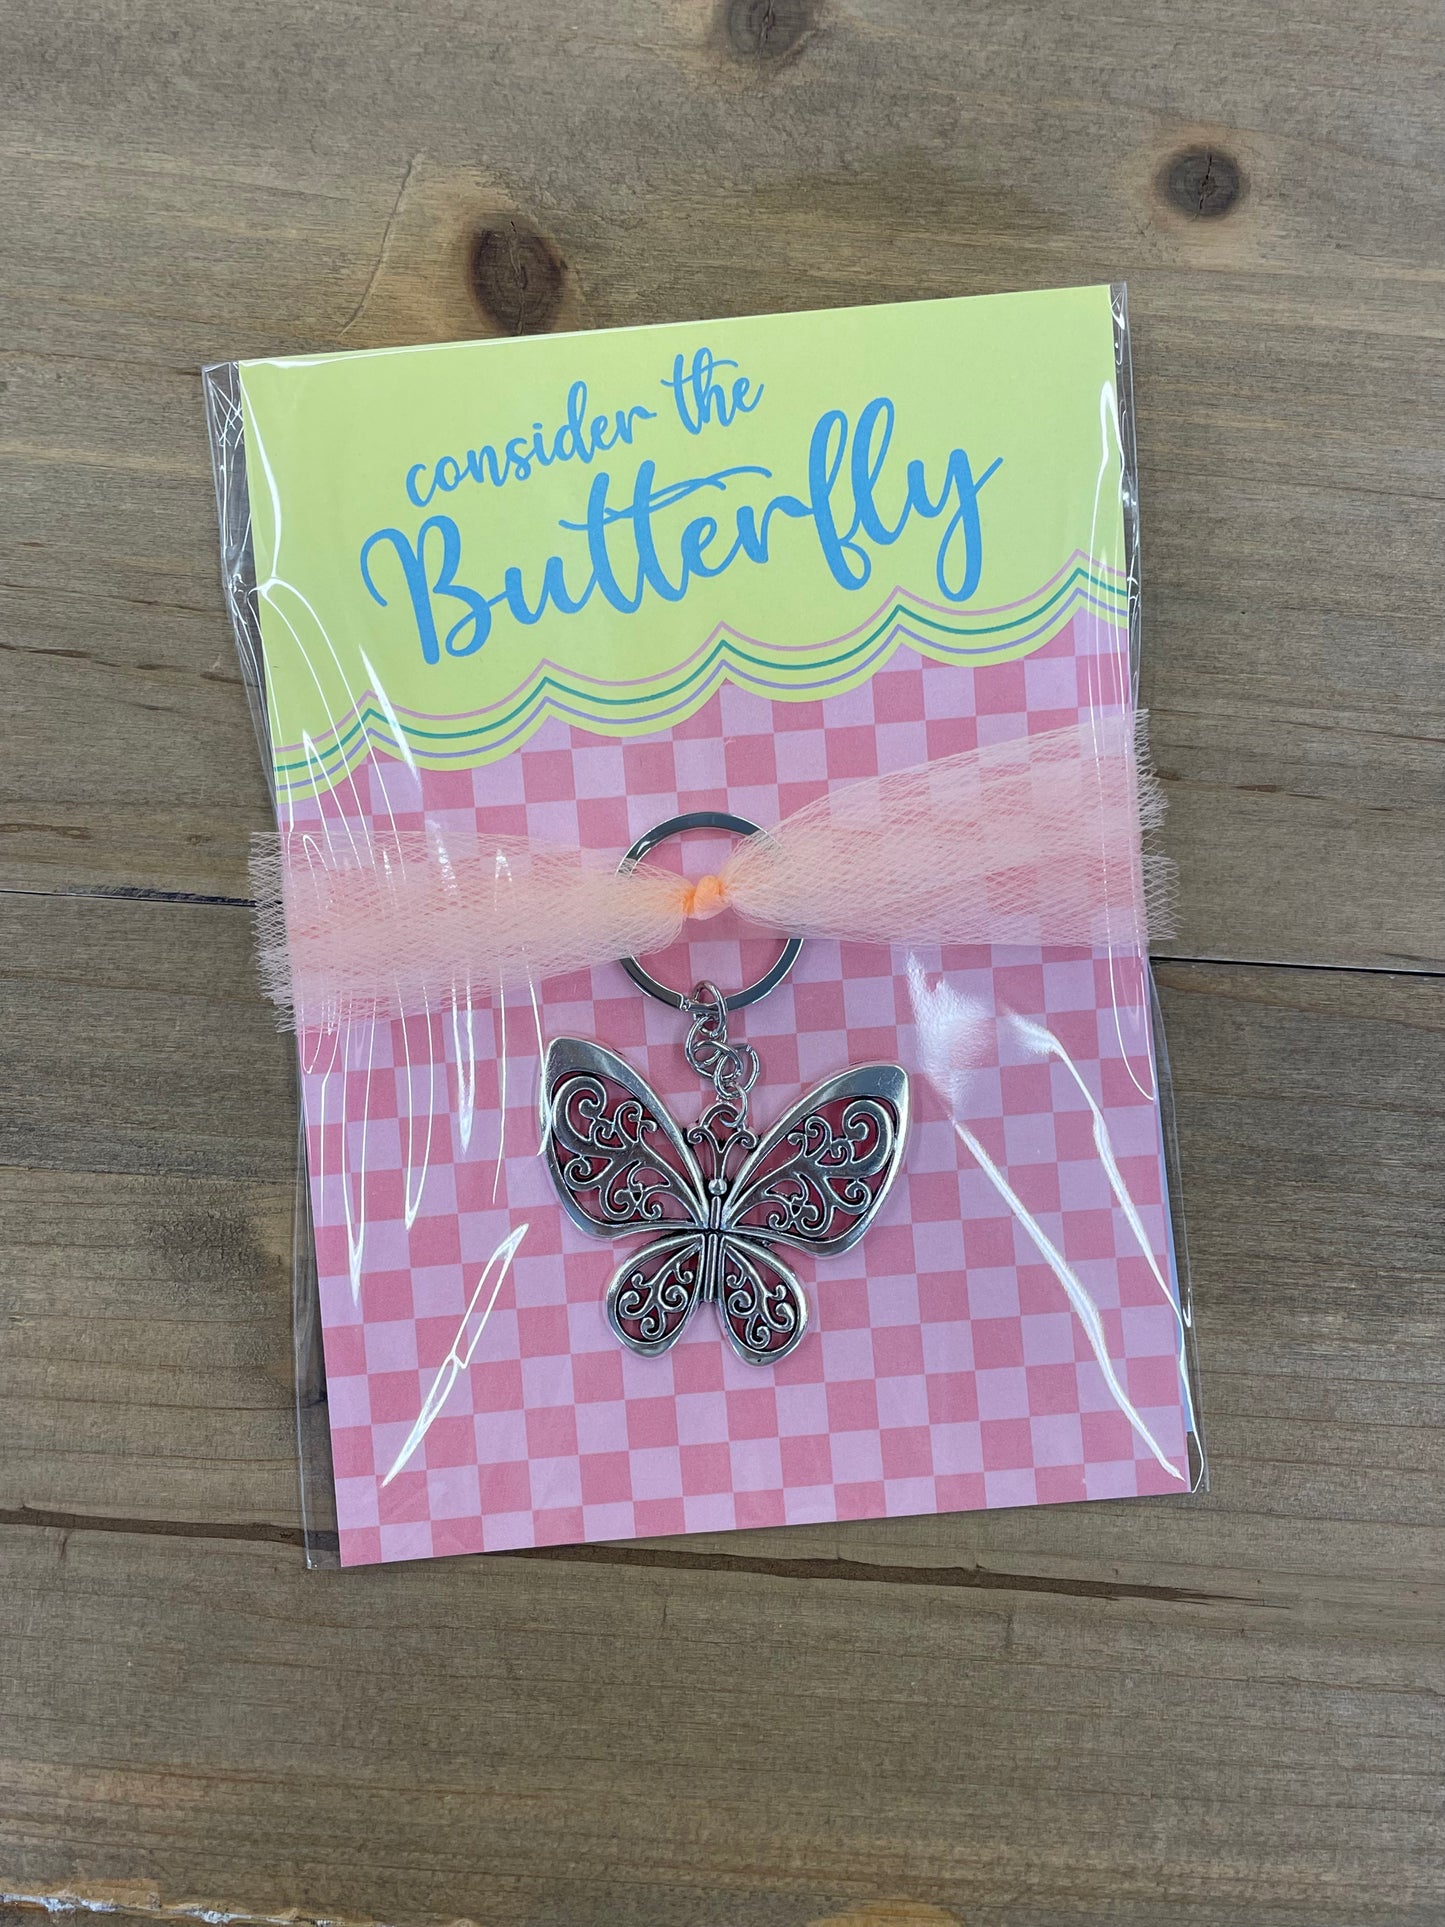 April Ministering Gift - Consider the Butterfly